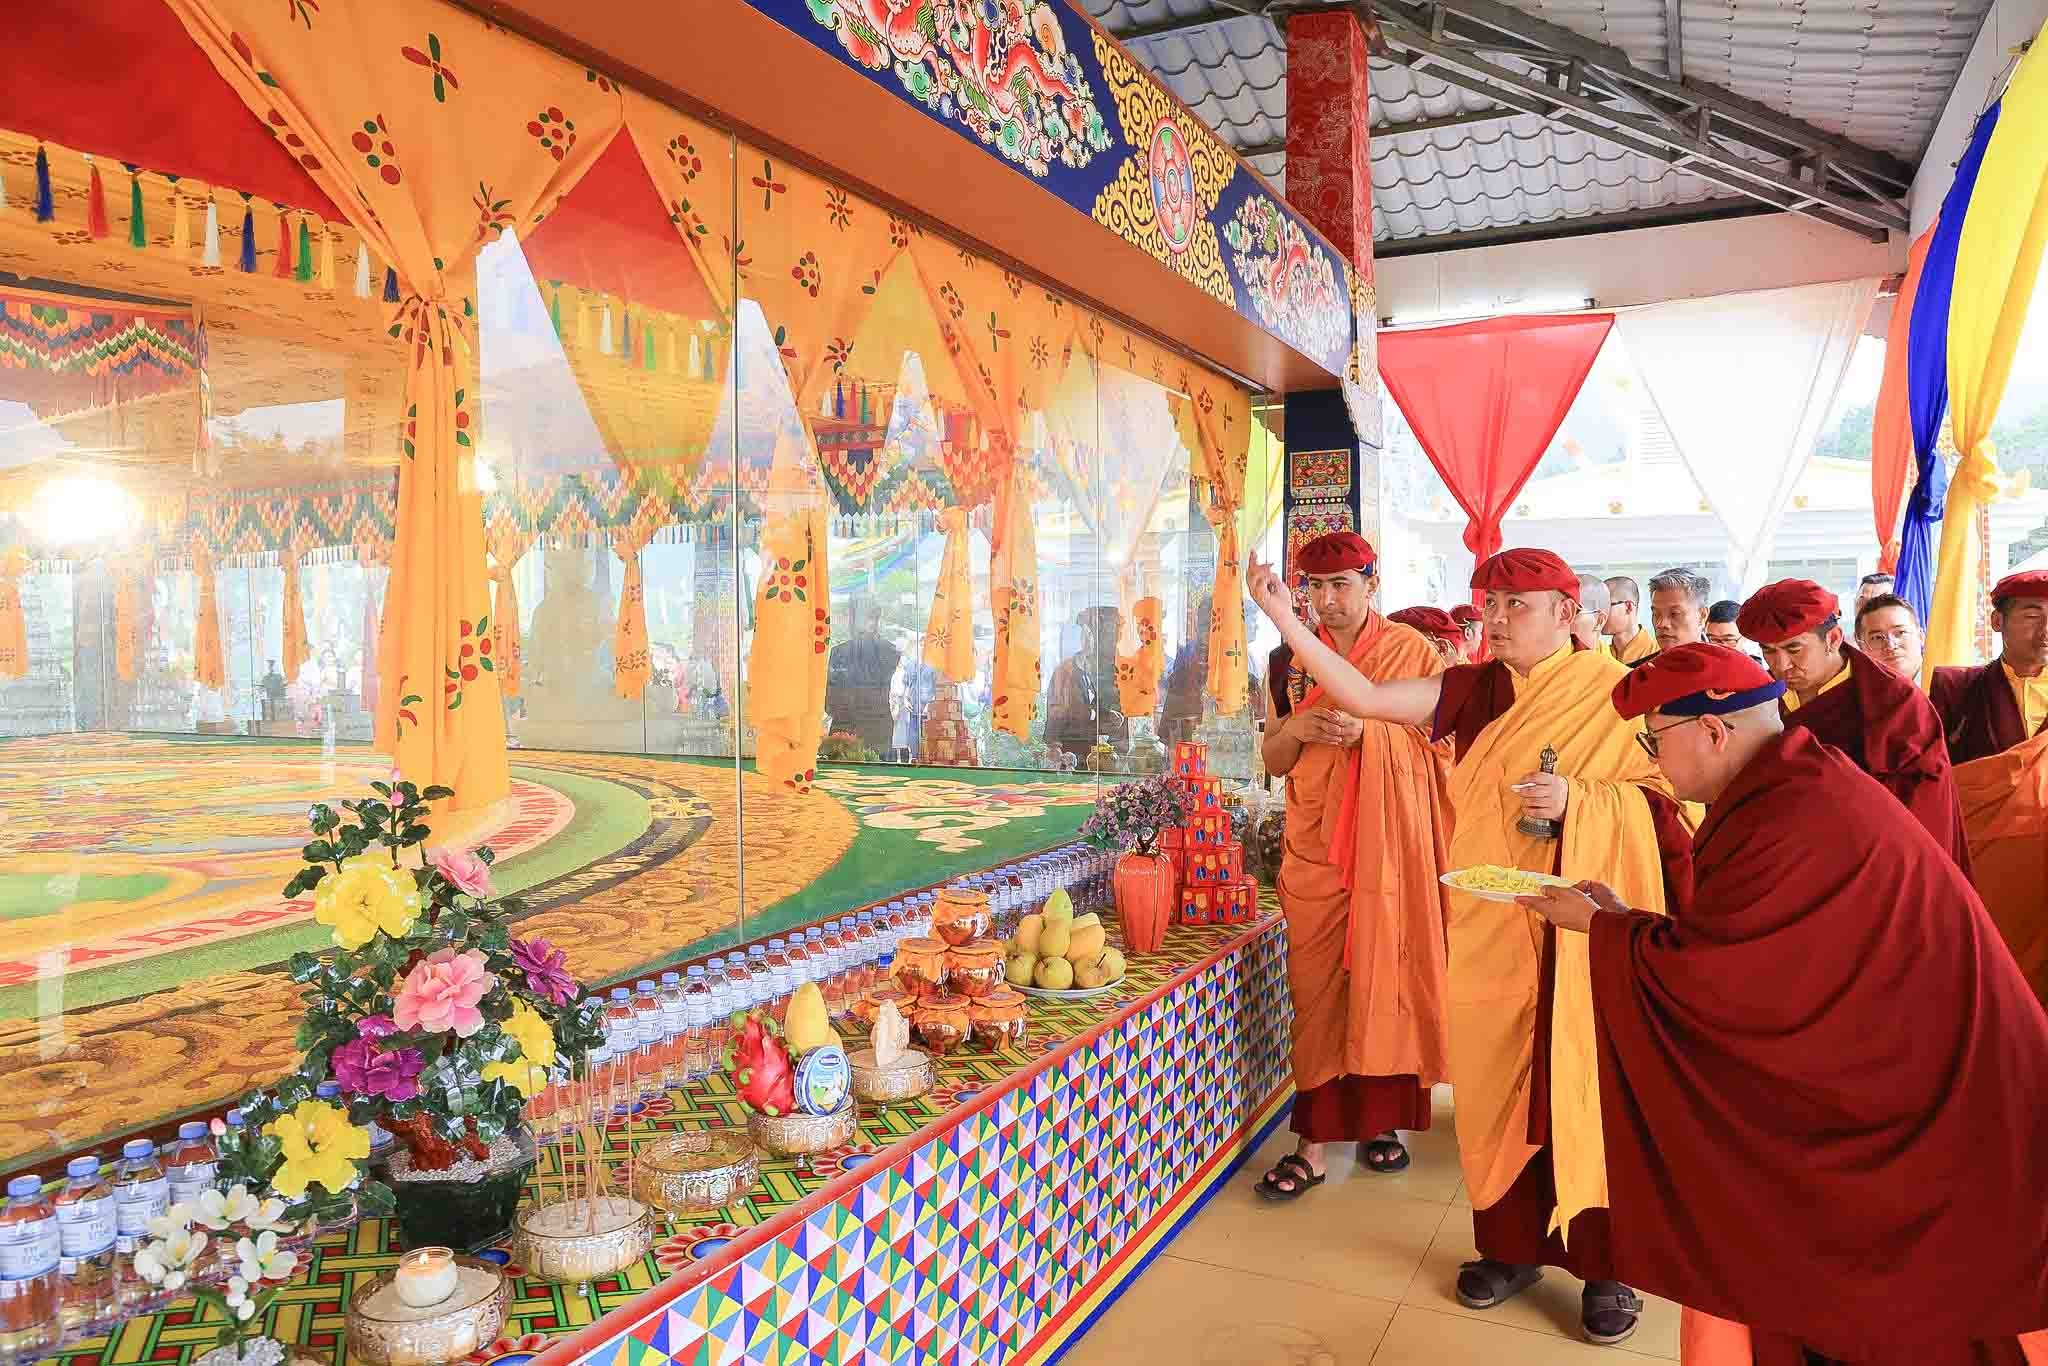 His Eminence Drukpa Thuksey Rinpoche: Let us re-establish real connections outside the small screens